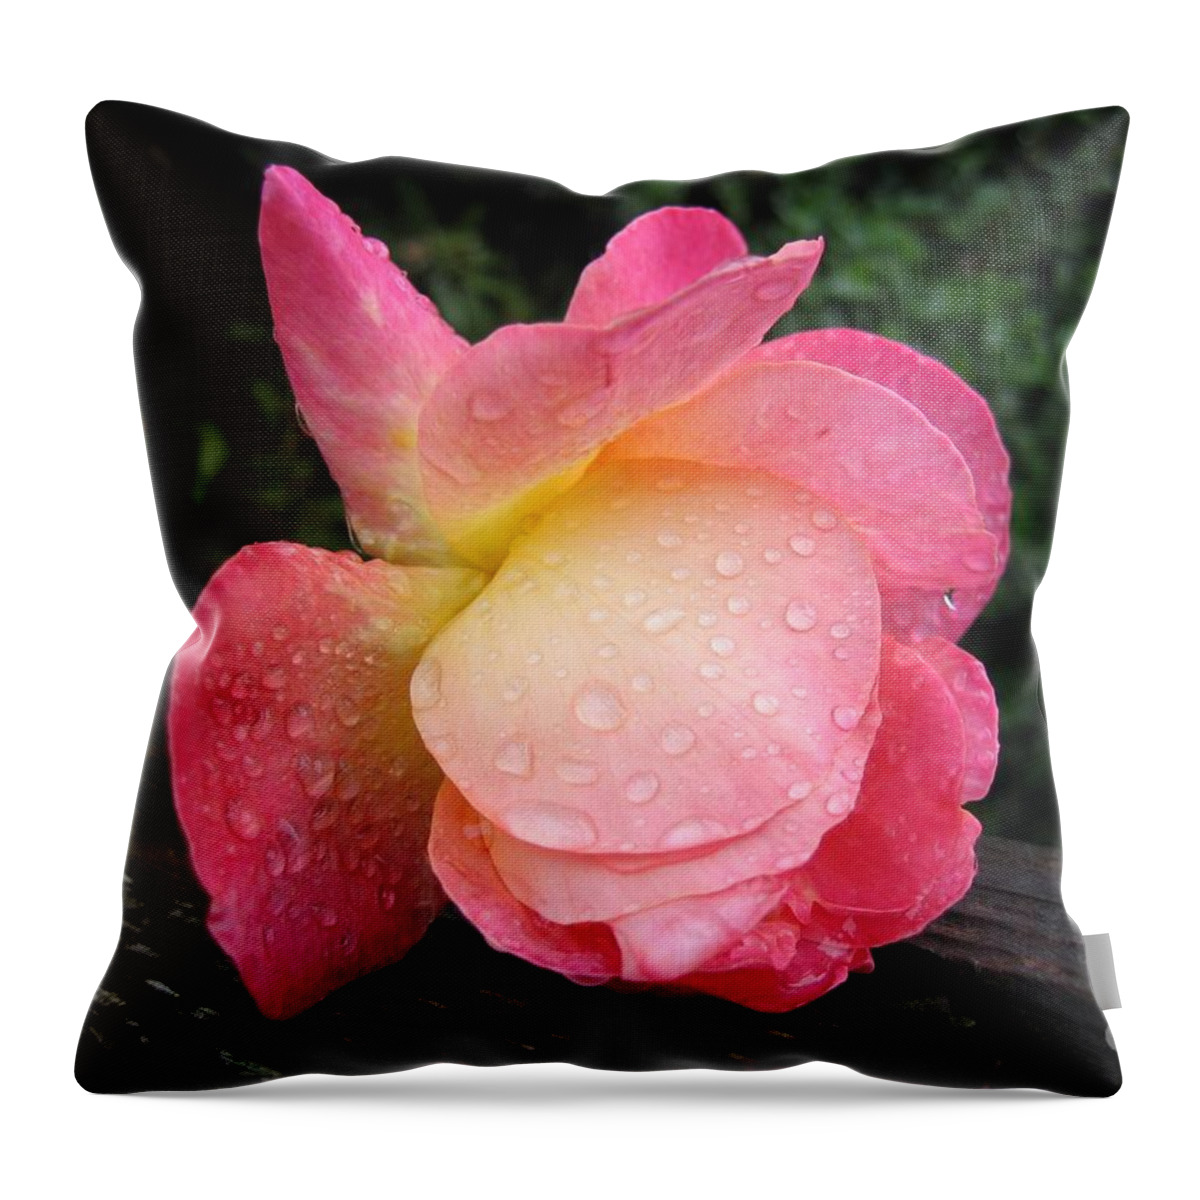 Garden Throw Pillow featuring the photograph Wet Rose by James B Toy